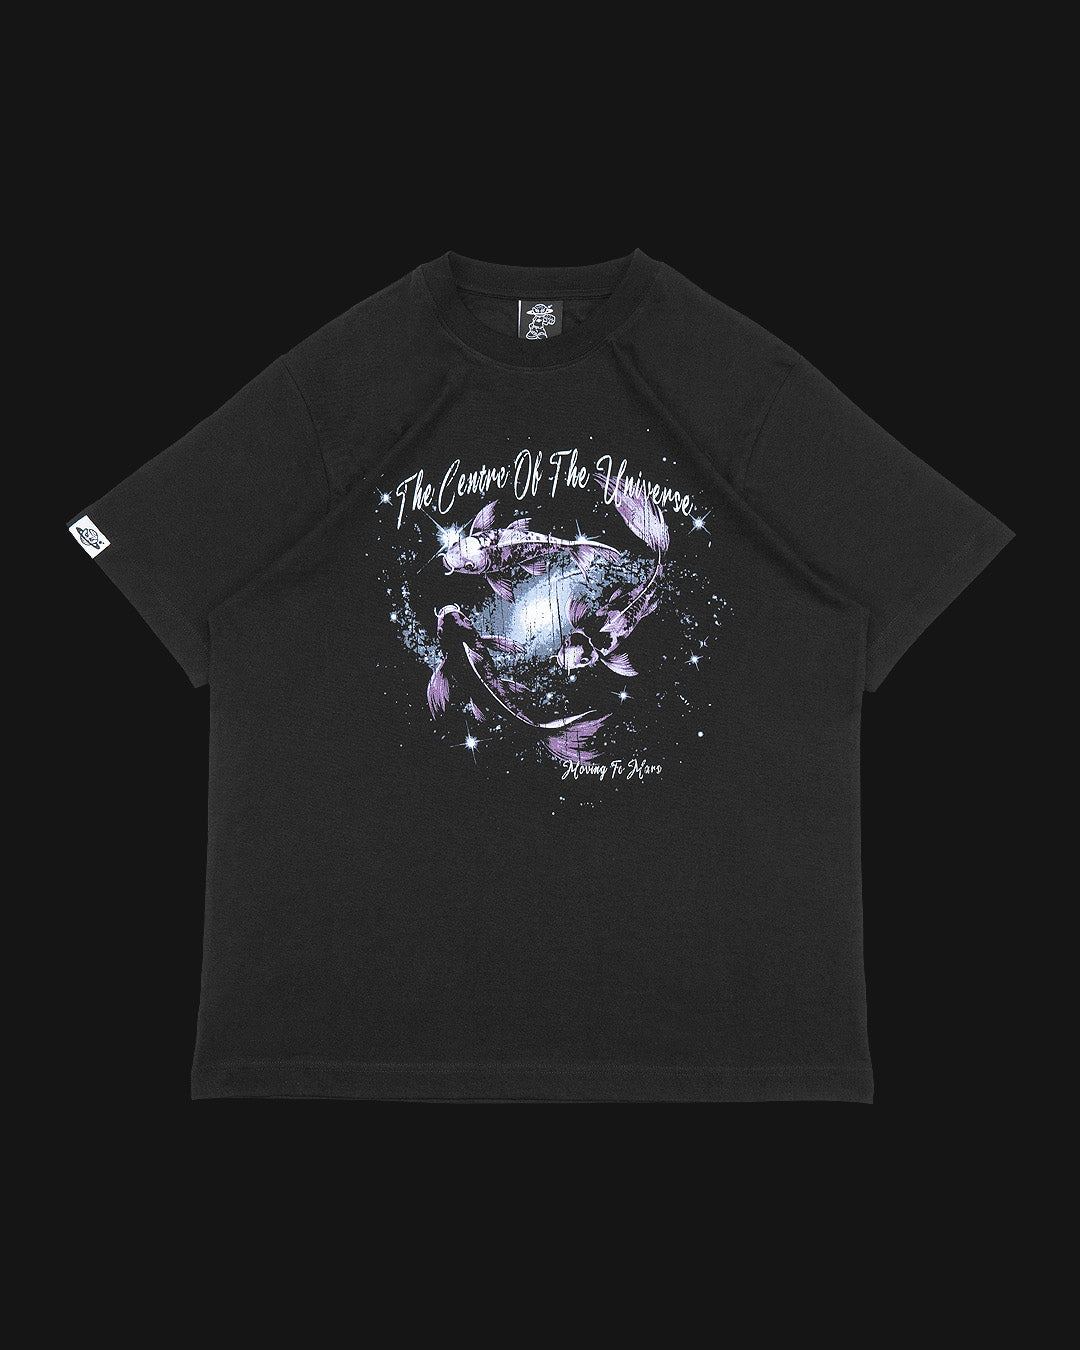 Centre Of the Universe Tee